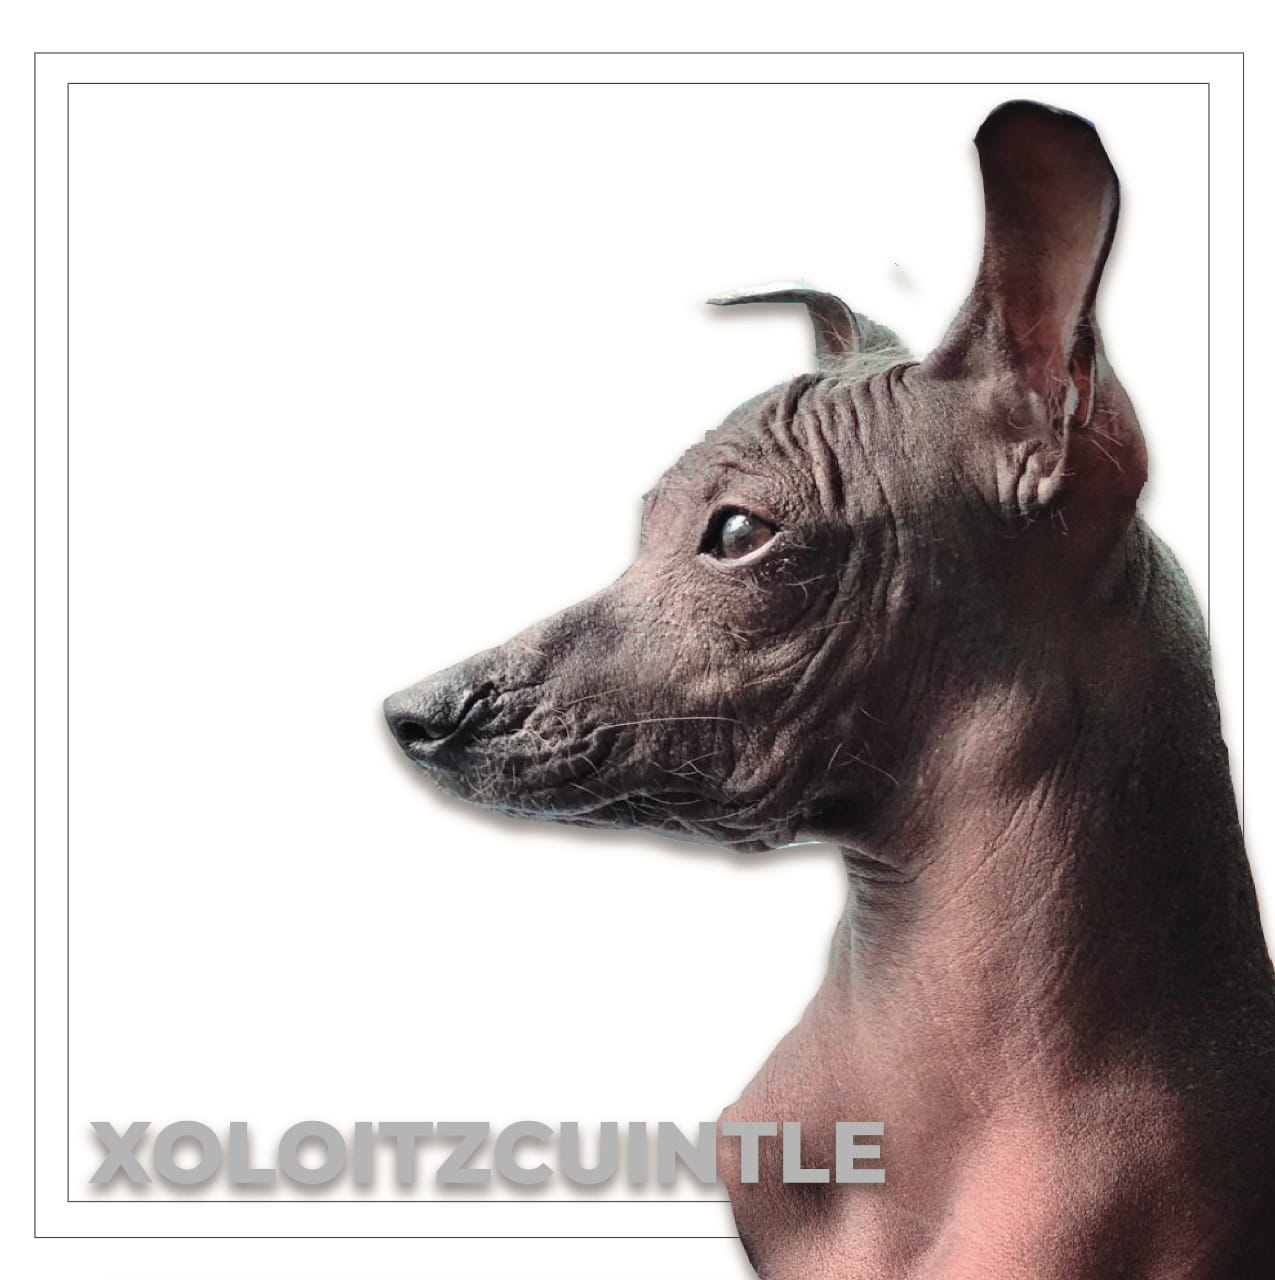 About the Legend of the Xoloitzcuintle, the Aztec dog.